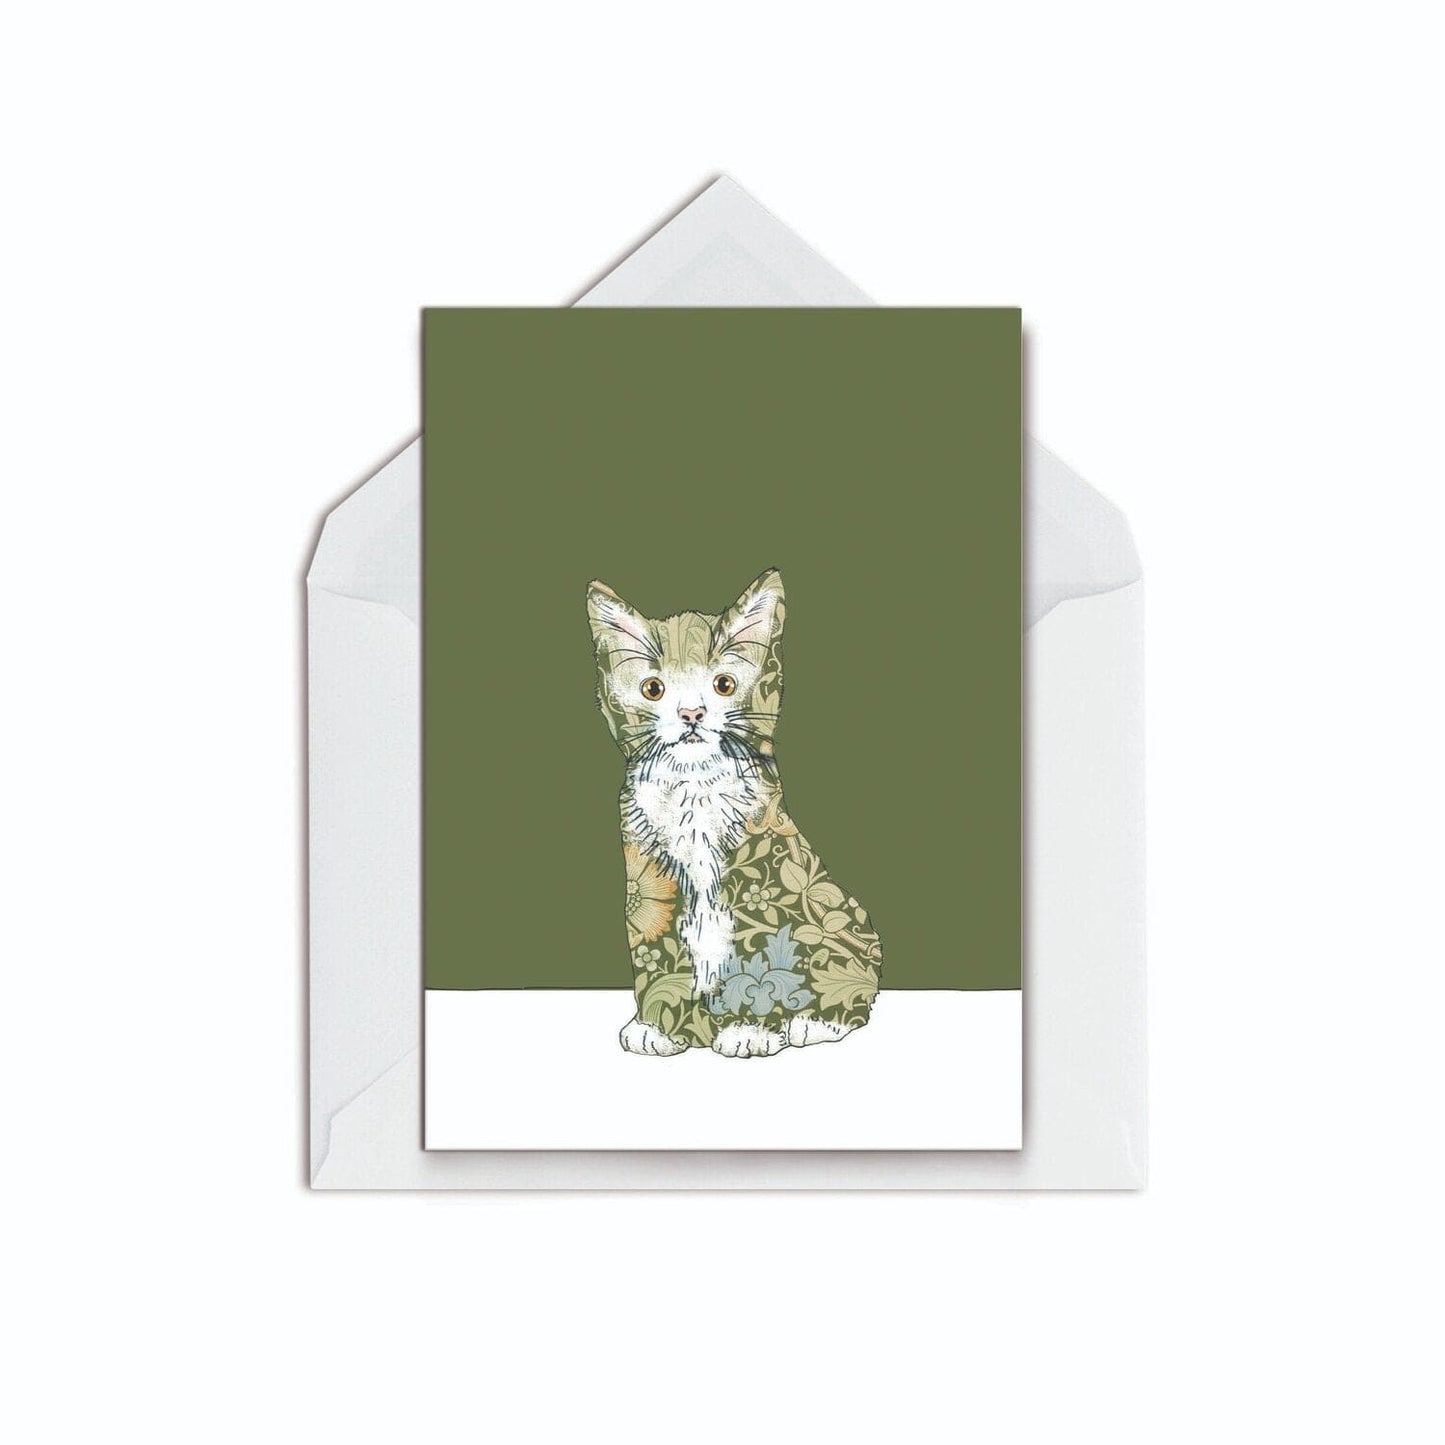 10 Cat Cards - The Paper People Greeting Cards